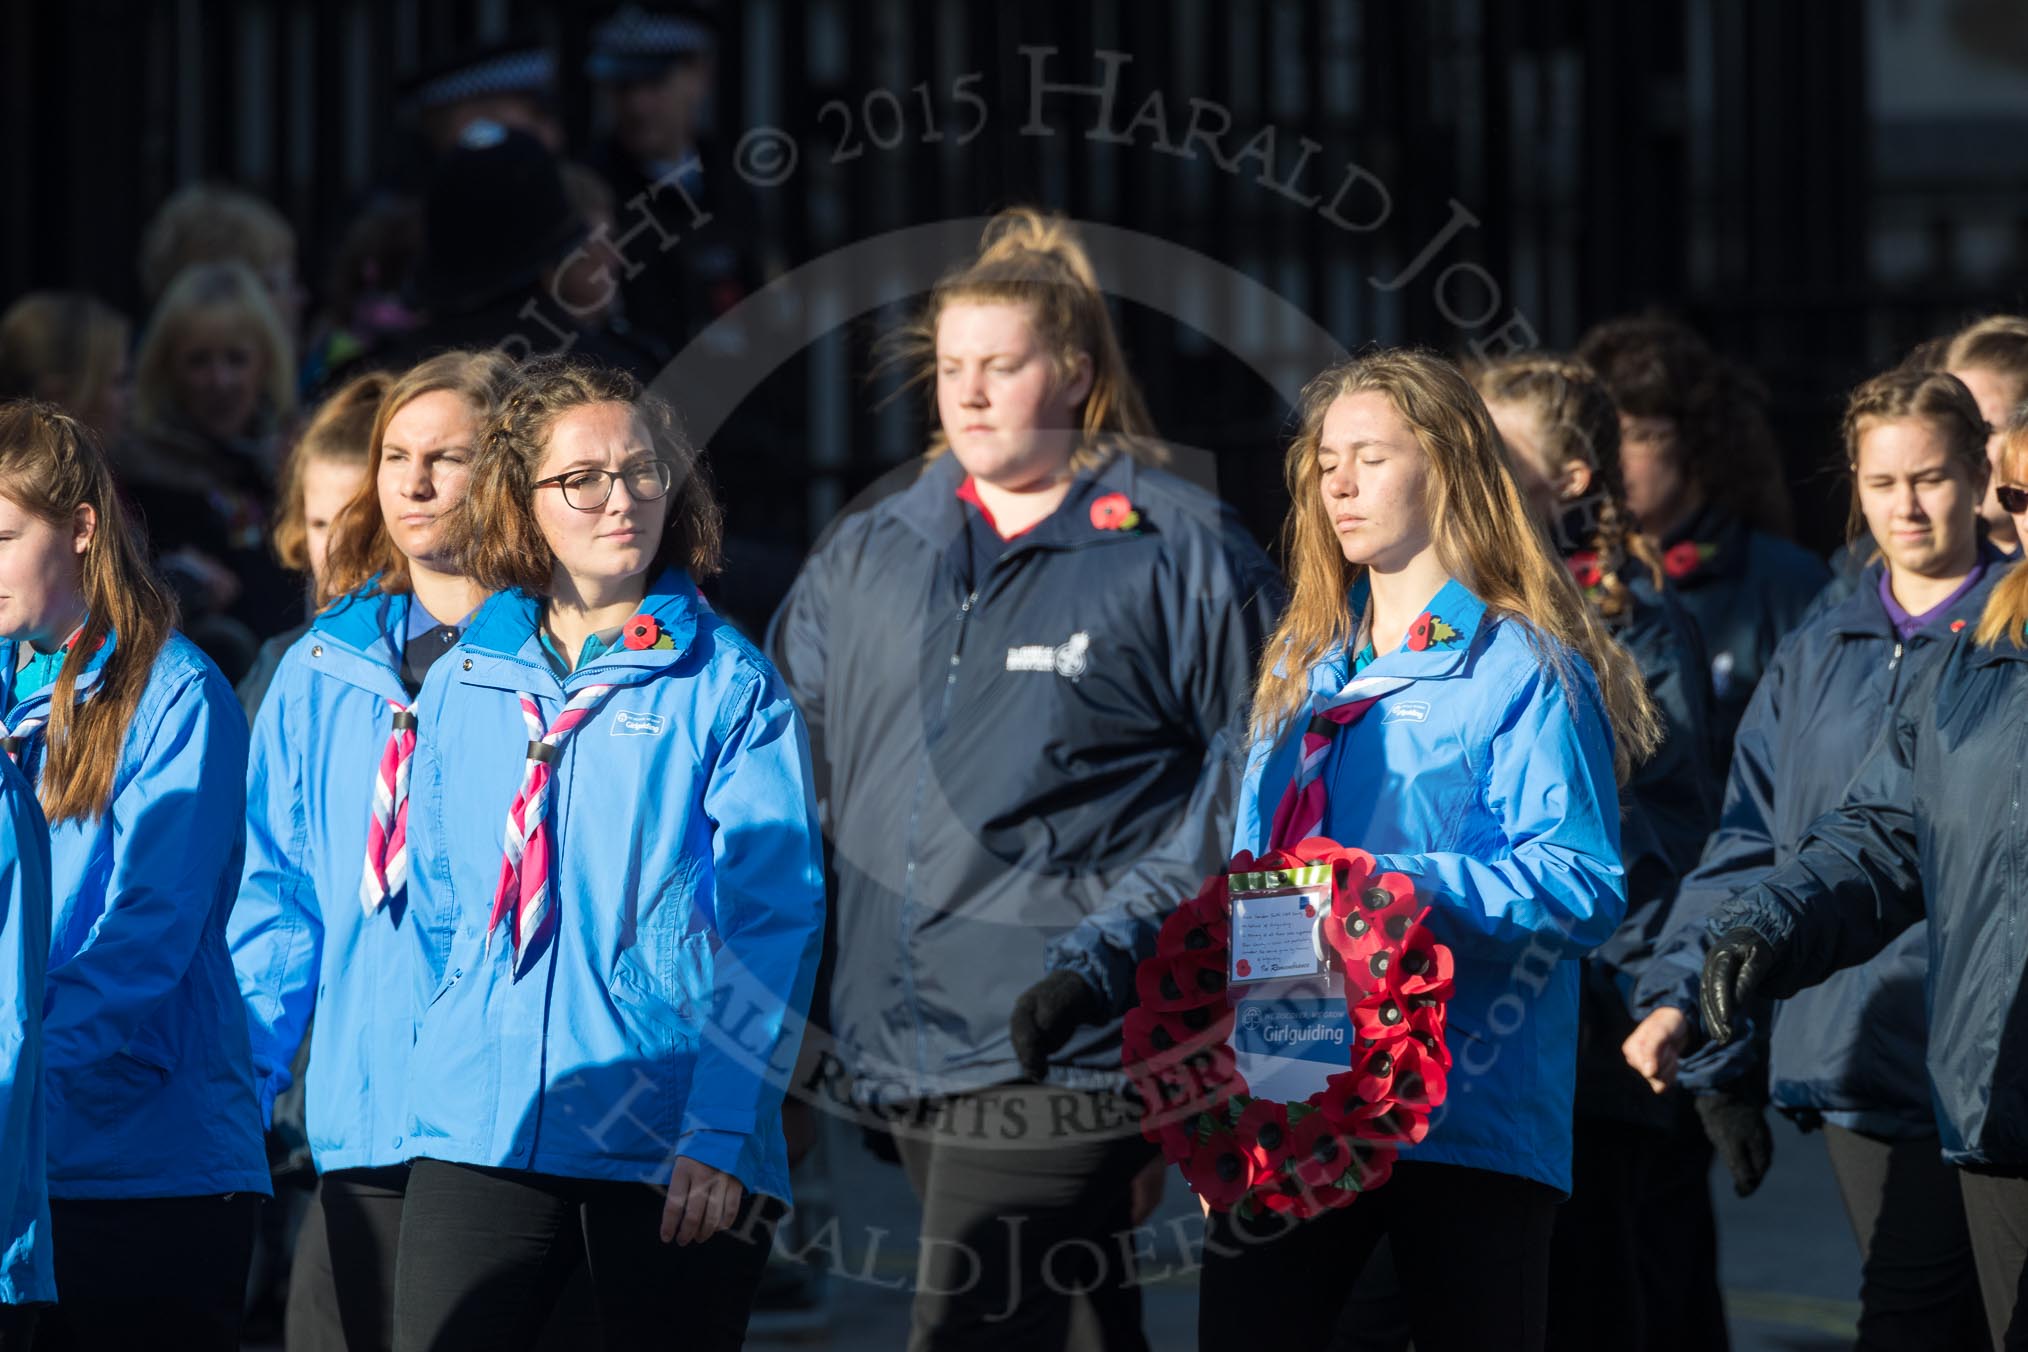 March Past, Remembrance Sunday at the Cenotaph 2016: M35 Girls Brigade England & Wales.
Cenotaph, Whitehall, London SW1,
London,
Greater London,
United Kingdom,
on 13 November 2016 at 13:18, image #2863